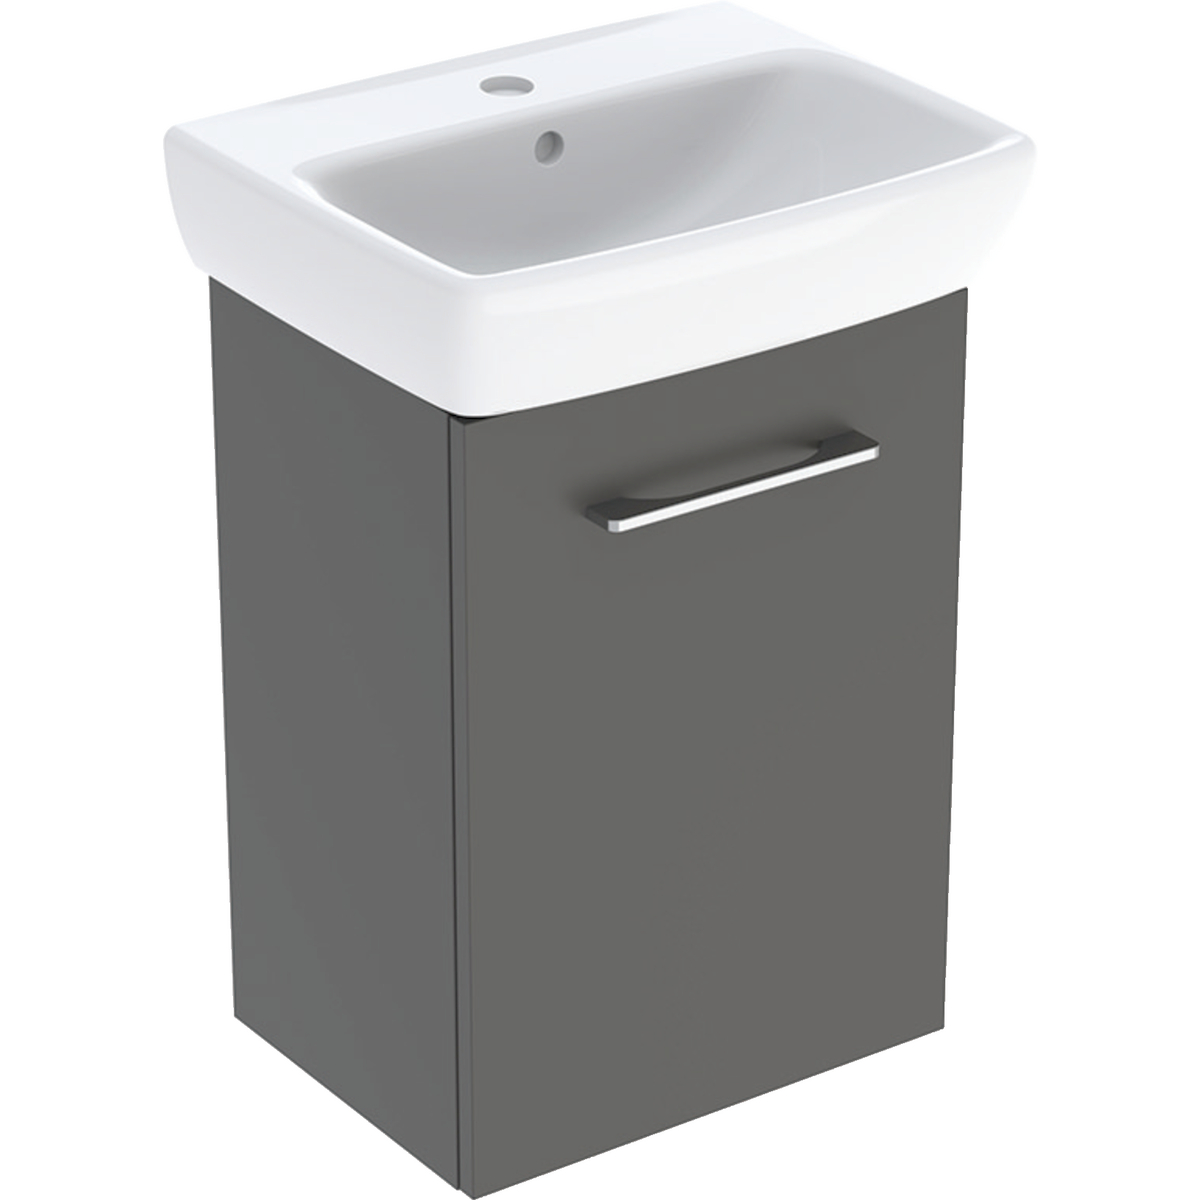 Selnova Square Basins With Cabinet, One Door 450mm - Lava